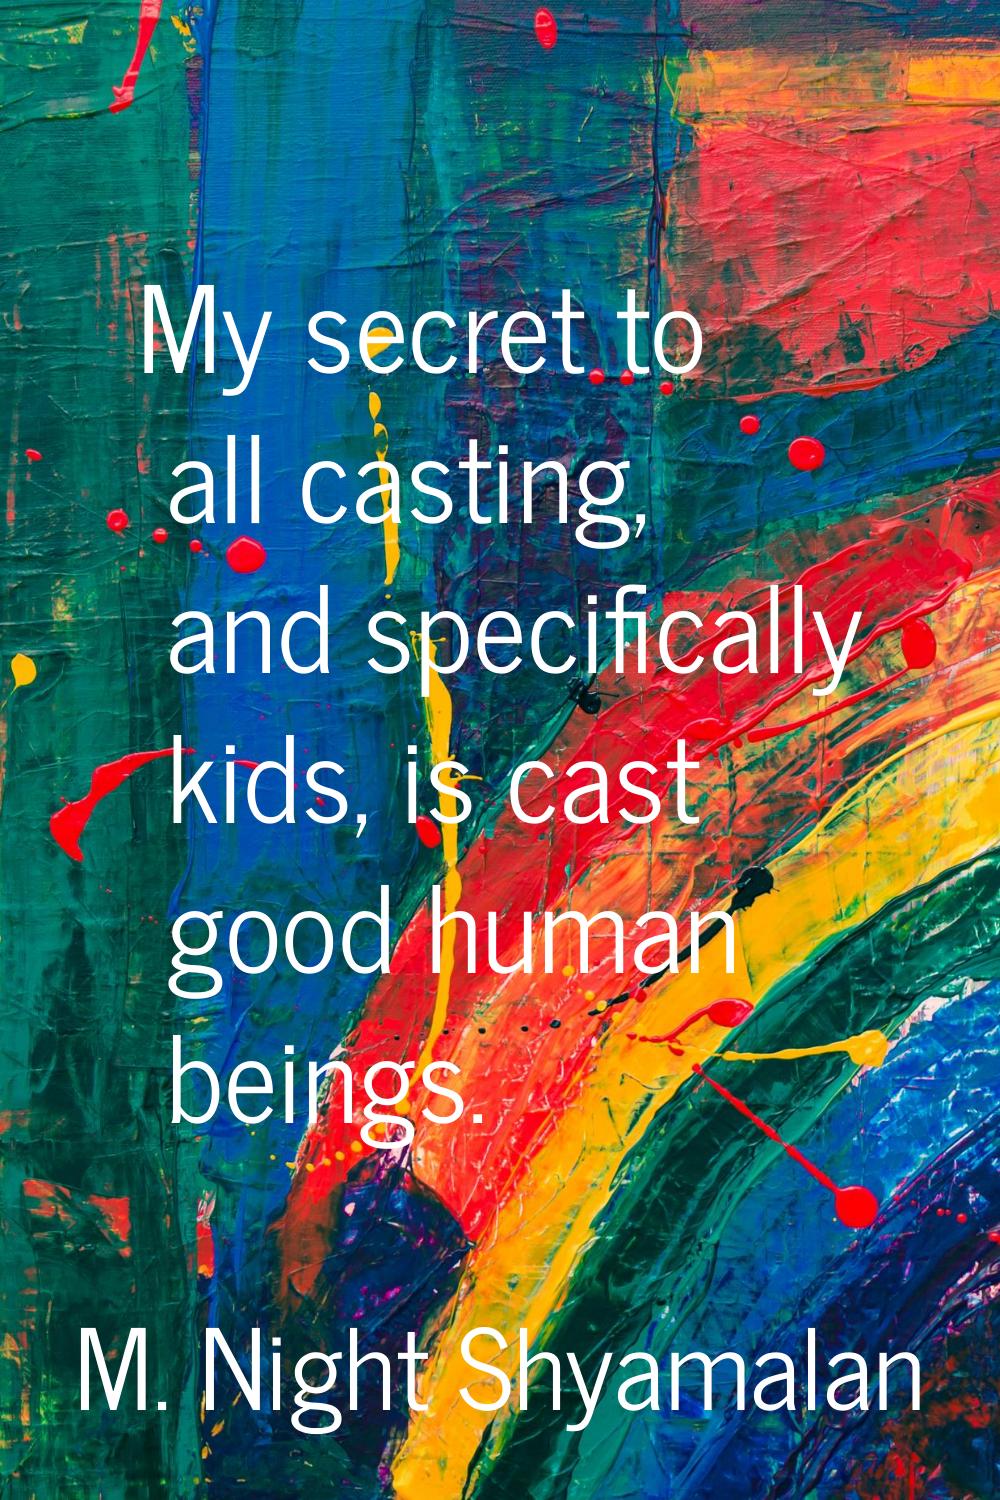 My secret to all casting, and specifically kids, is cast good human beings.